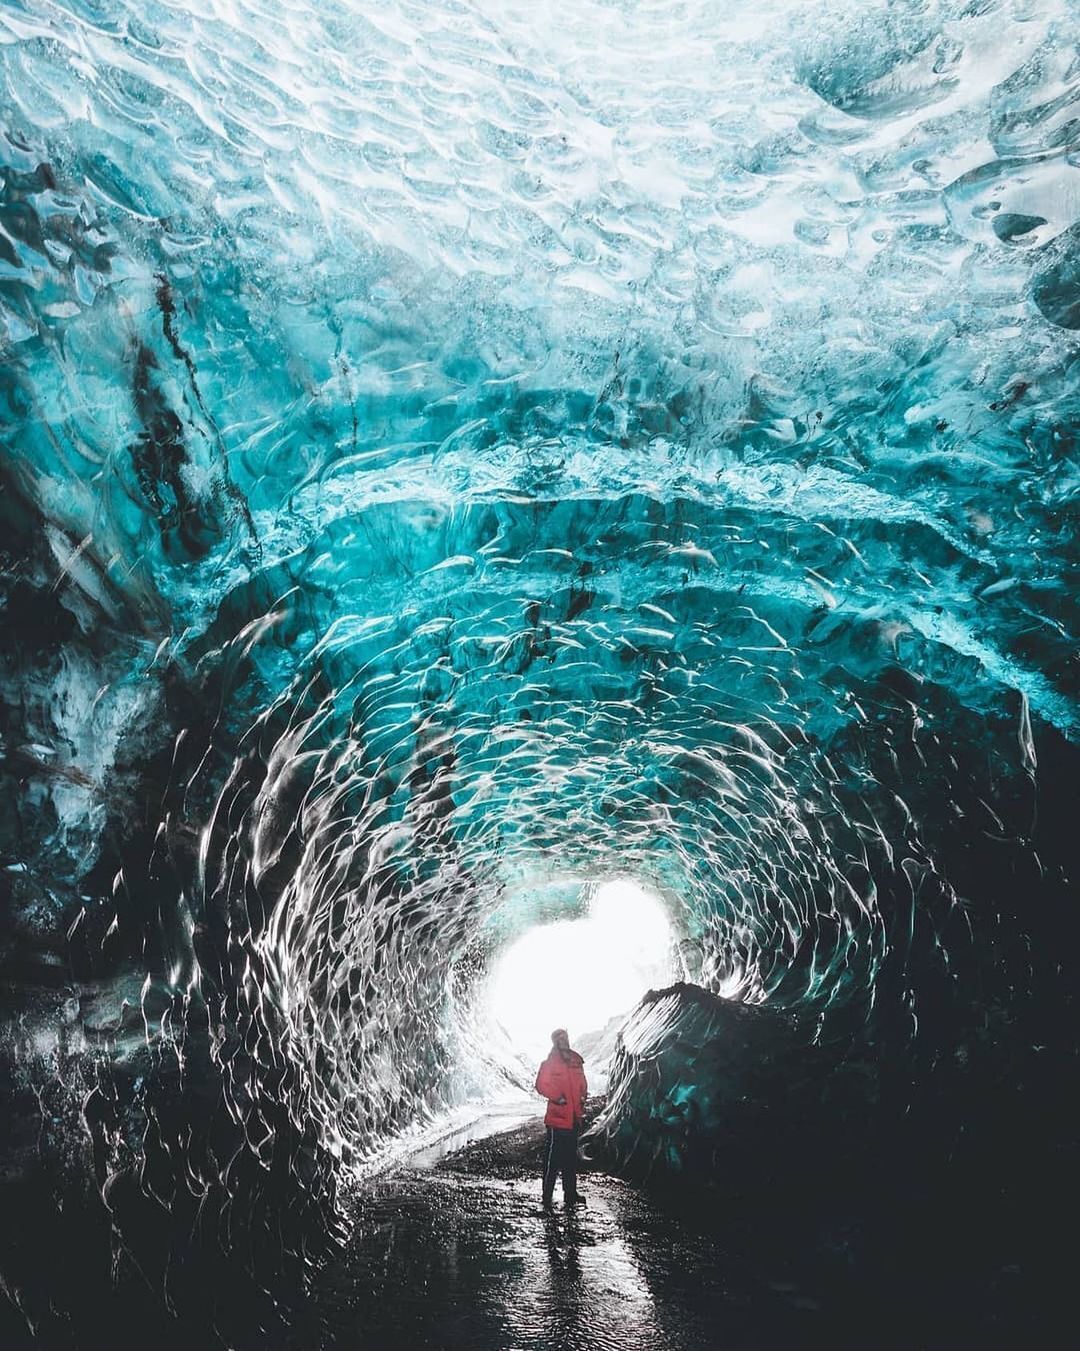 Winter beauties: a list of the world's best ice caves